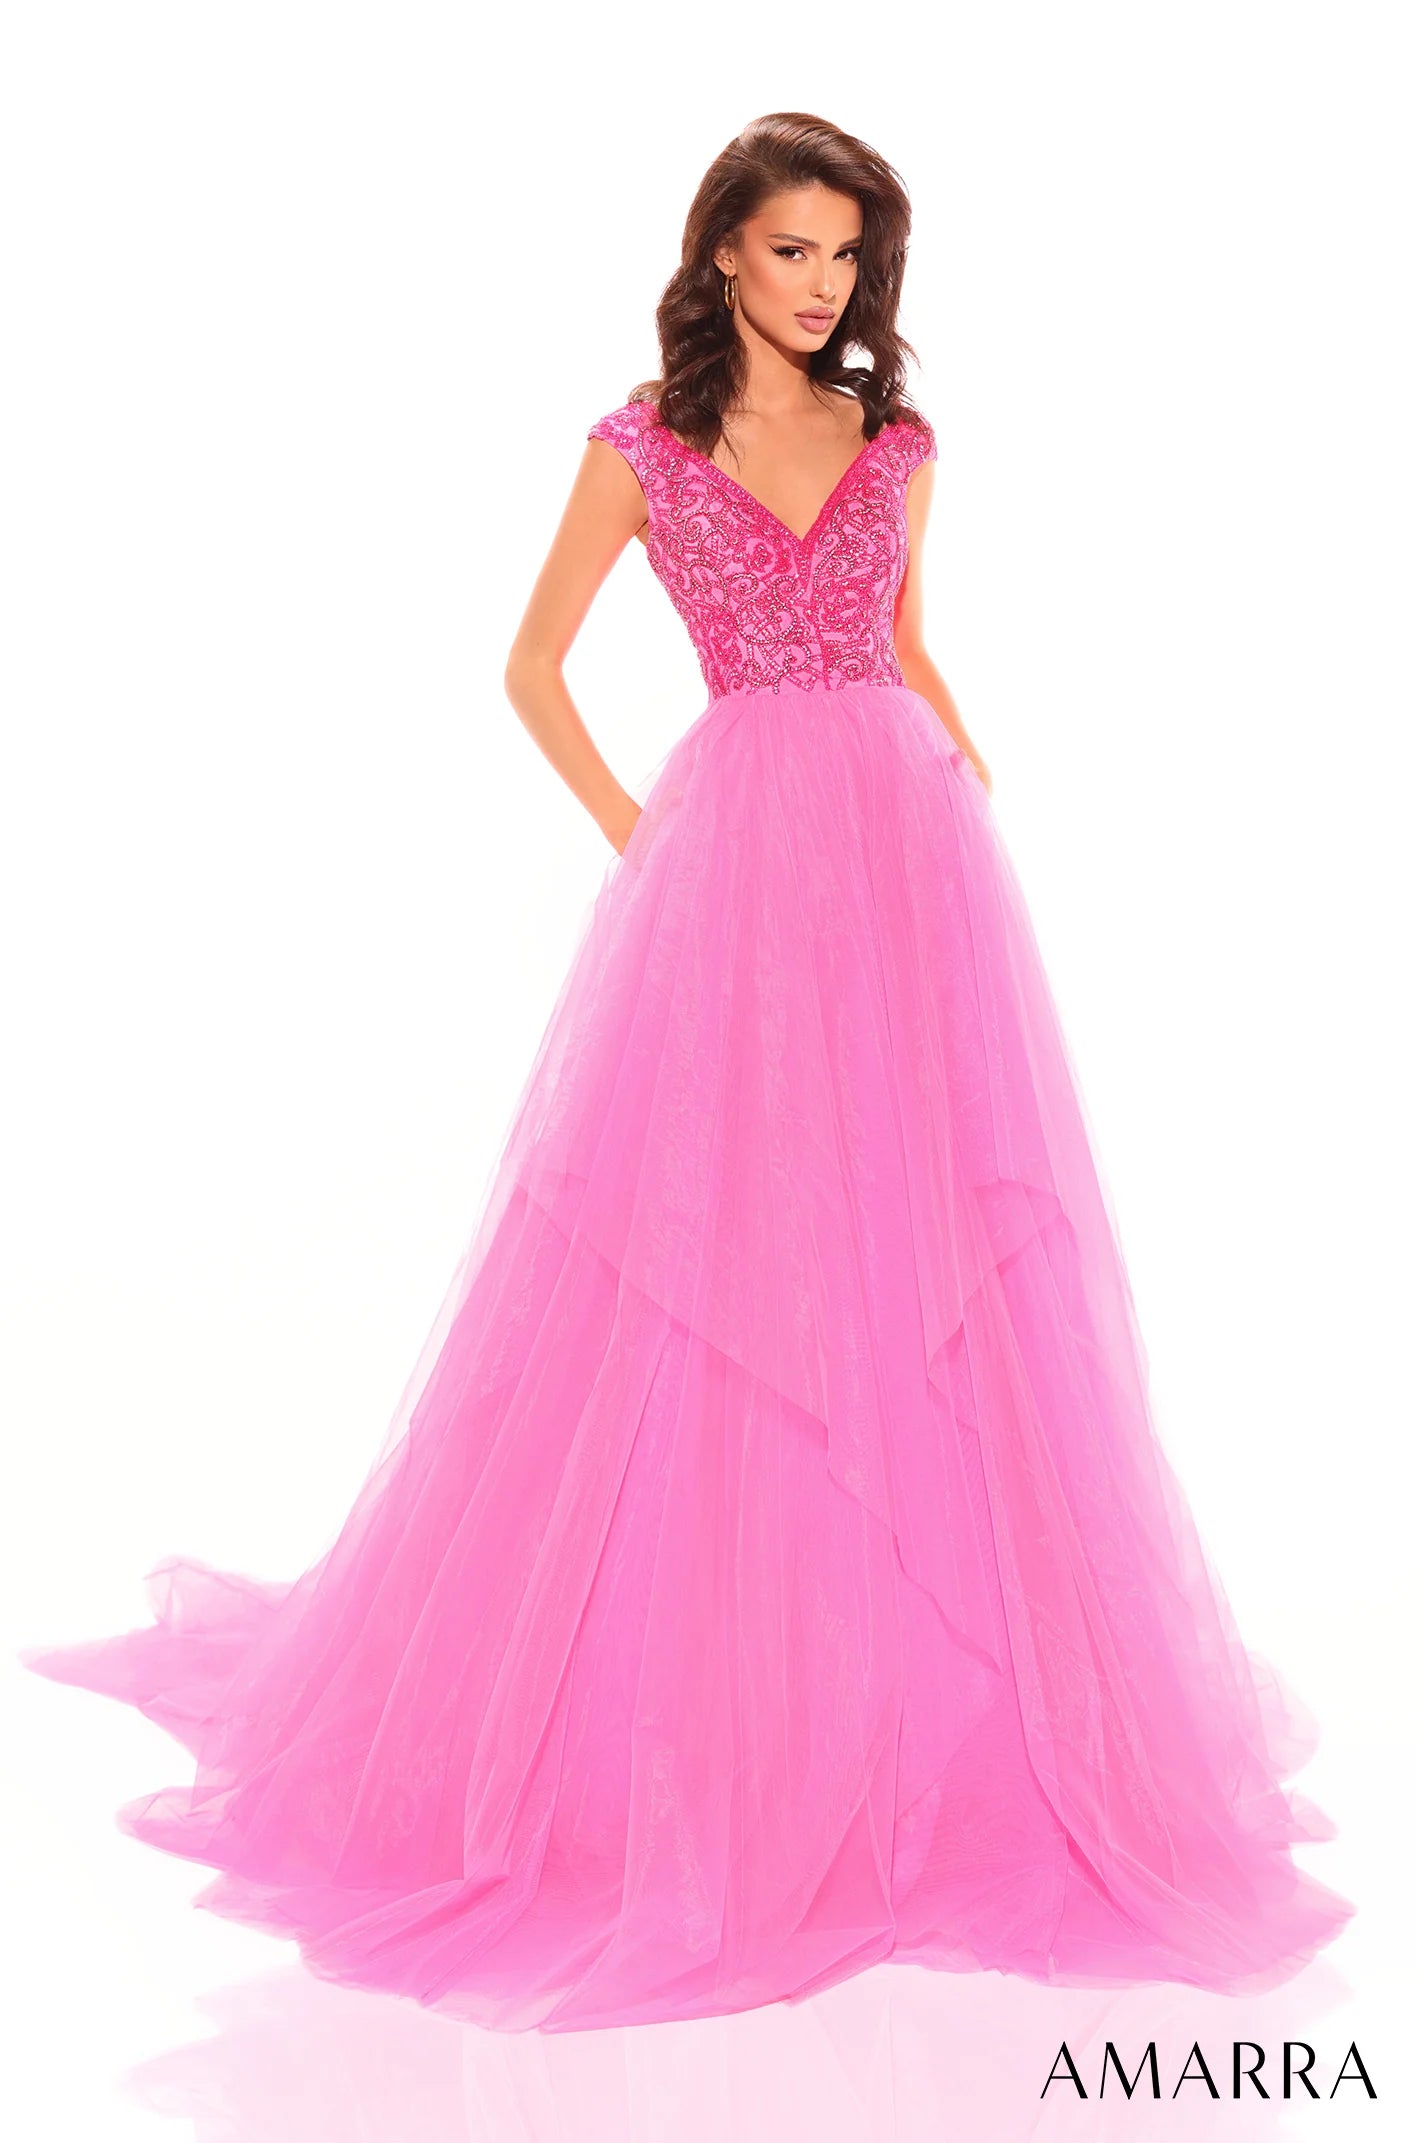 This dazzling prom dress radiates charm, romance and magic - all ingredients for a perfect prom night. The bodice is magnificently designed with labyrinthine rhinestone detail, highlighted by the off-the-shoulder sleeve and flirtatious sweetheart neckline that will capture the attention of anyone that beholds you. However, that is not the main piece of this gorgeous attire. 